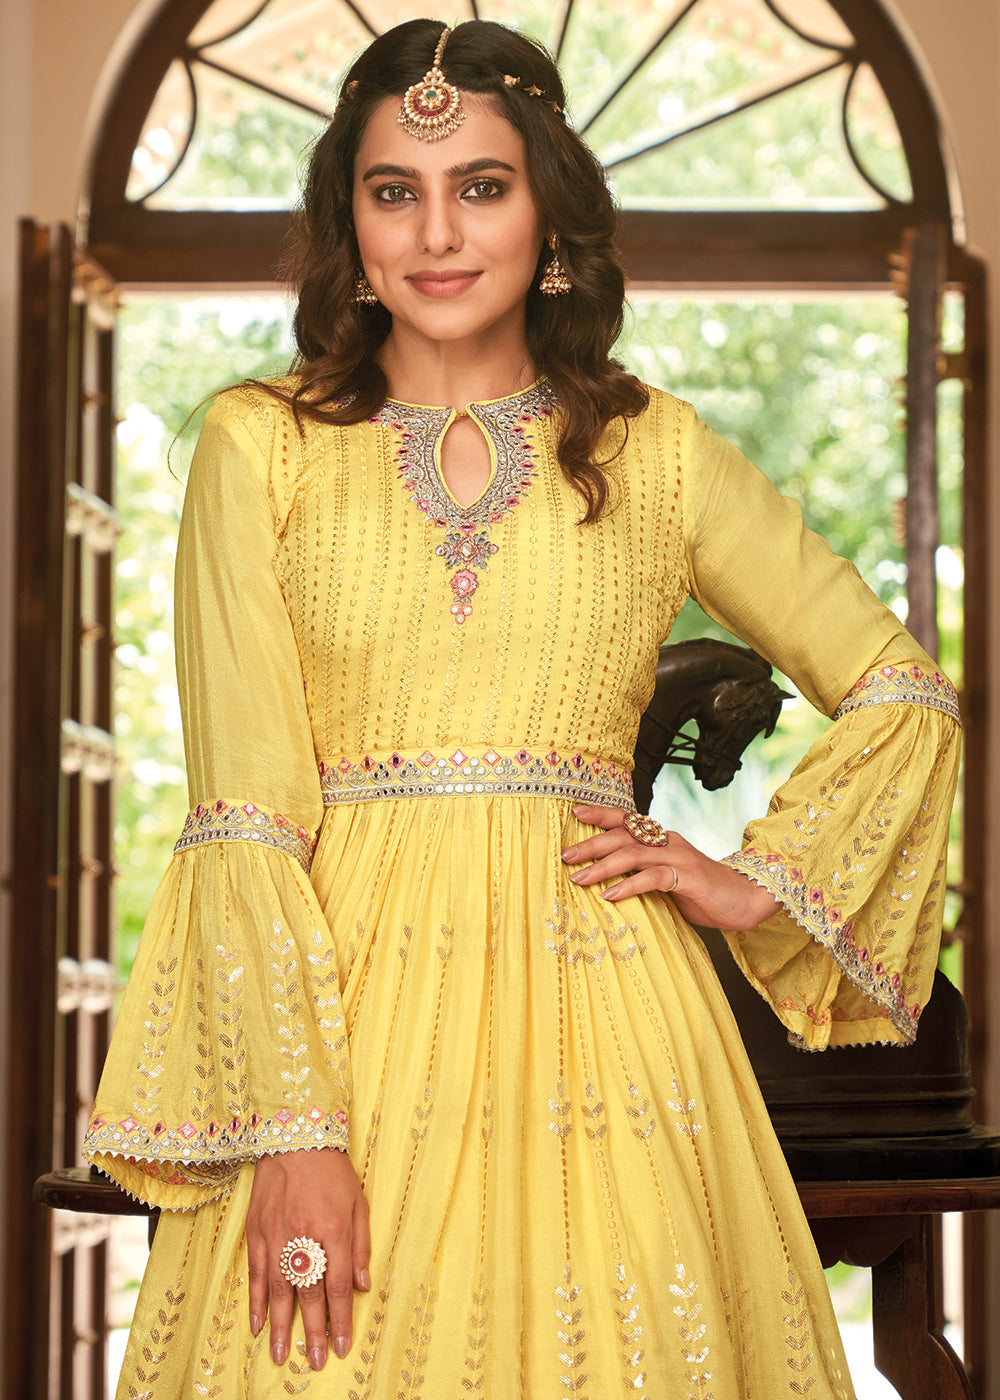 Buy Now Sharara Top Style Yellow Heavy Chinon Lehenga Skirt Suit Online in USA, UK, Canada & Worldwide at Empress Clothing.